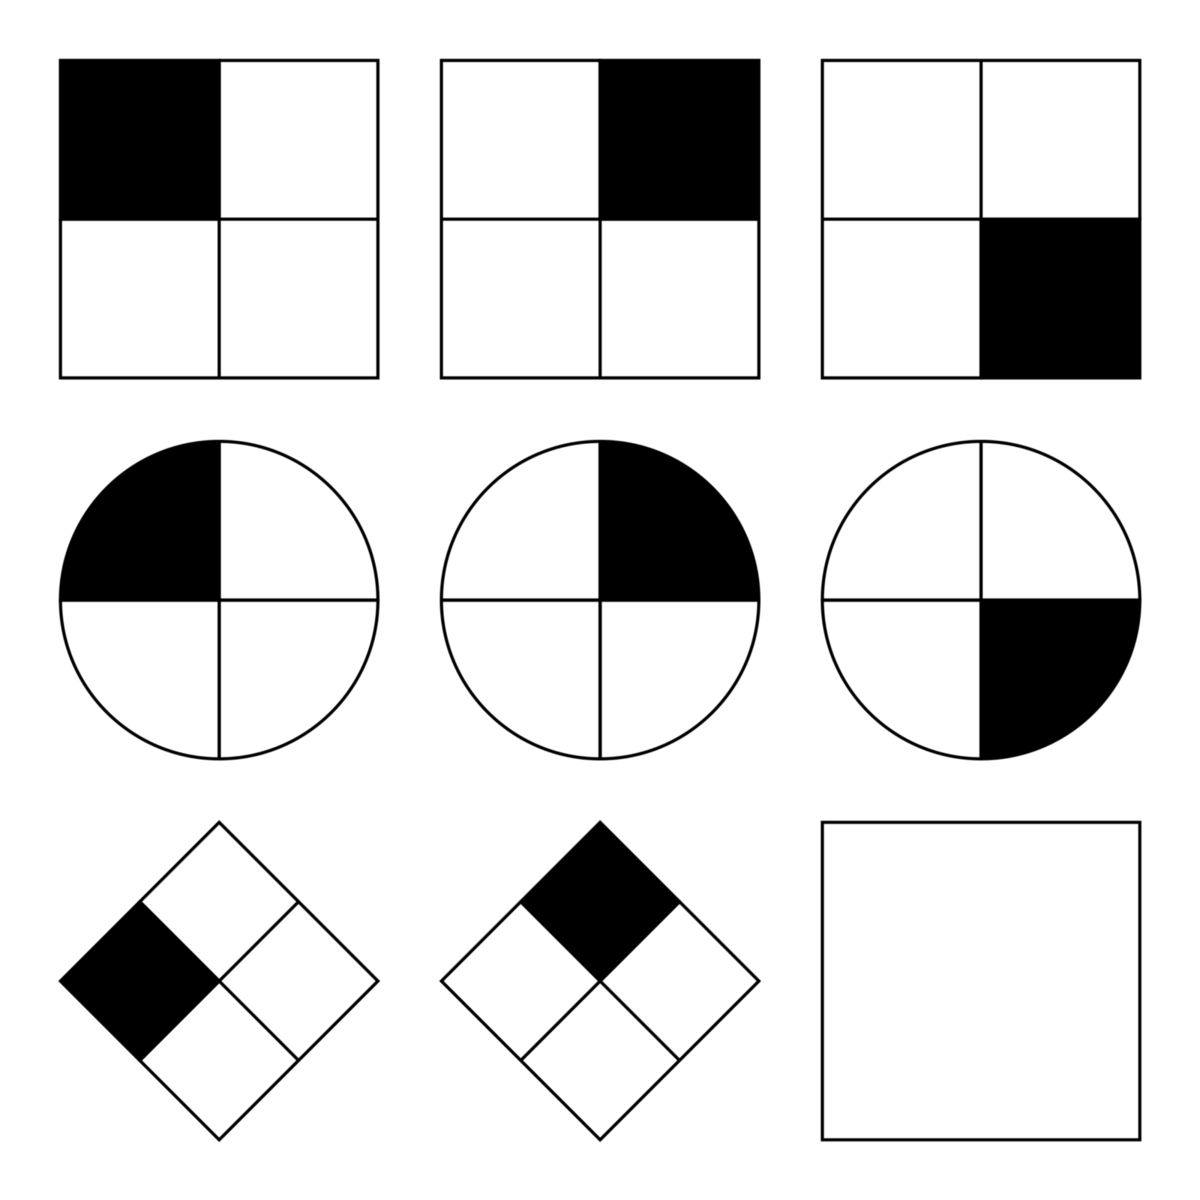 An IQ test item in the style of a Raven’s Progressive Matrices test. Given
eight patterns, the subject must identify the missing ninth pattern. [source:
